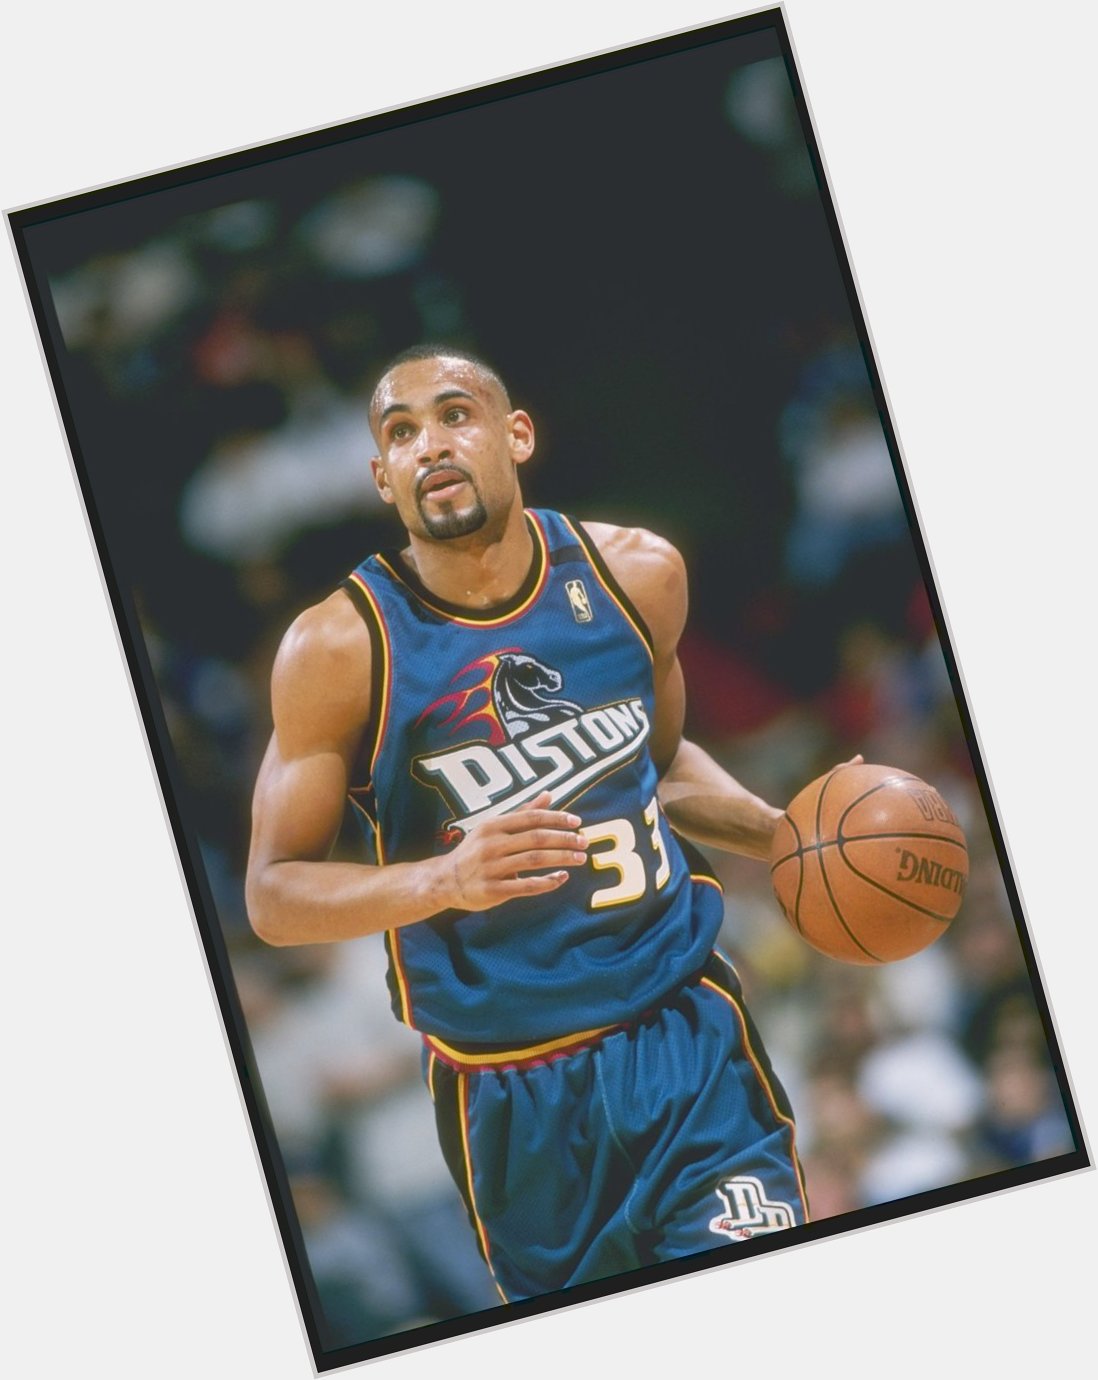 Happy Birthday, Grant Hill!

And that jersey  